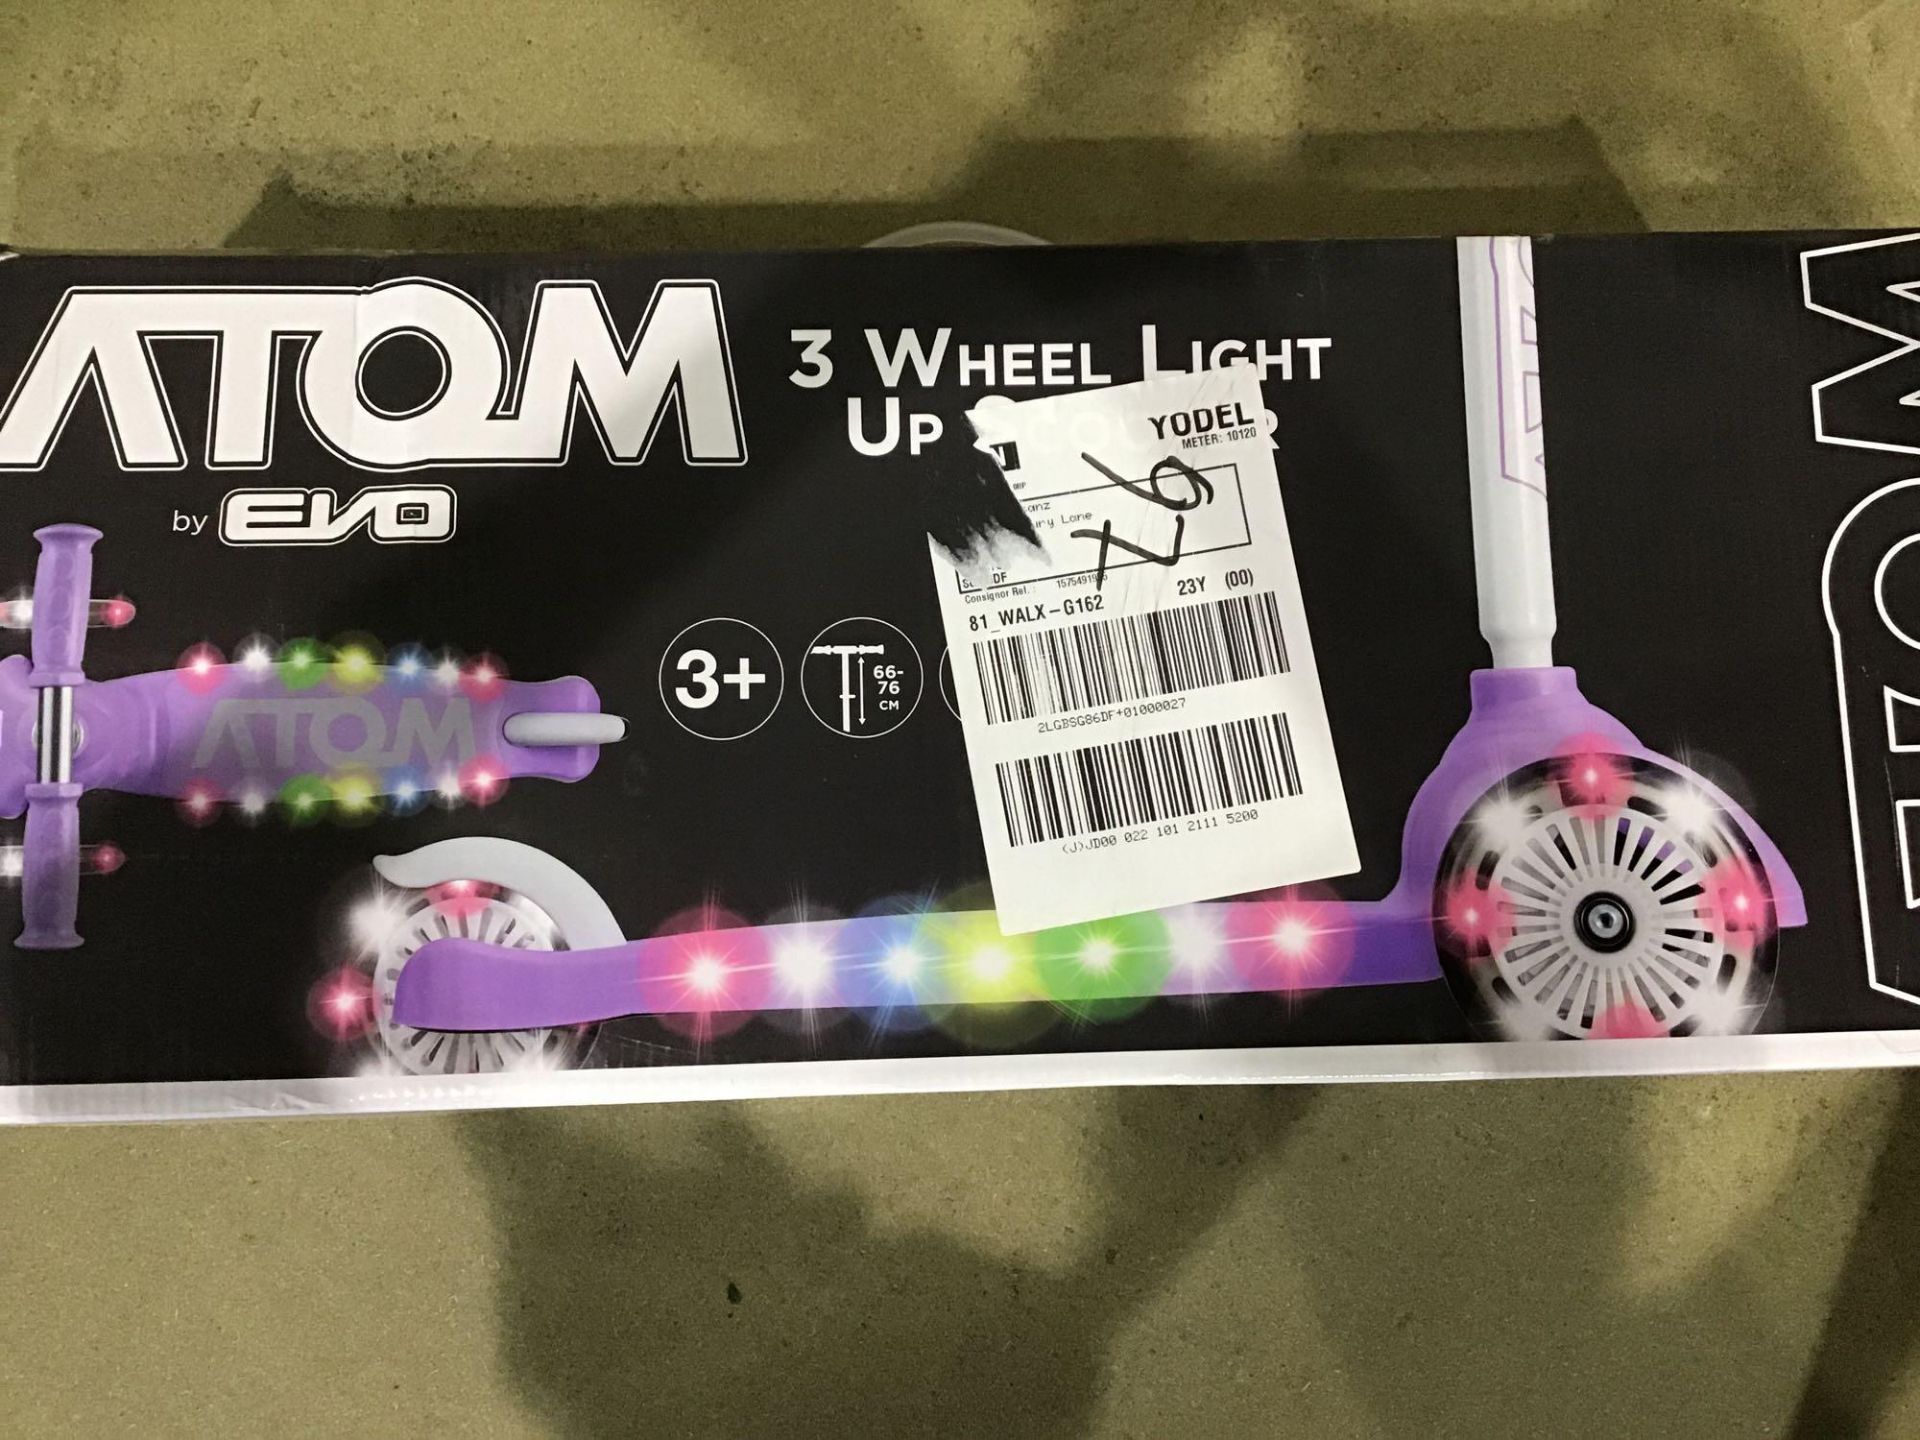 Atom Light Up Tri Scooter 893/5641 £24.99 RRP - Image 3 of 4